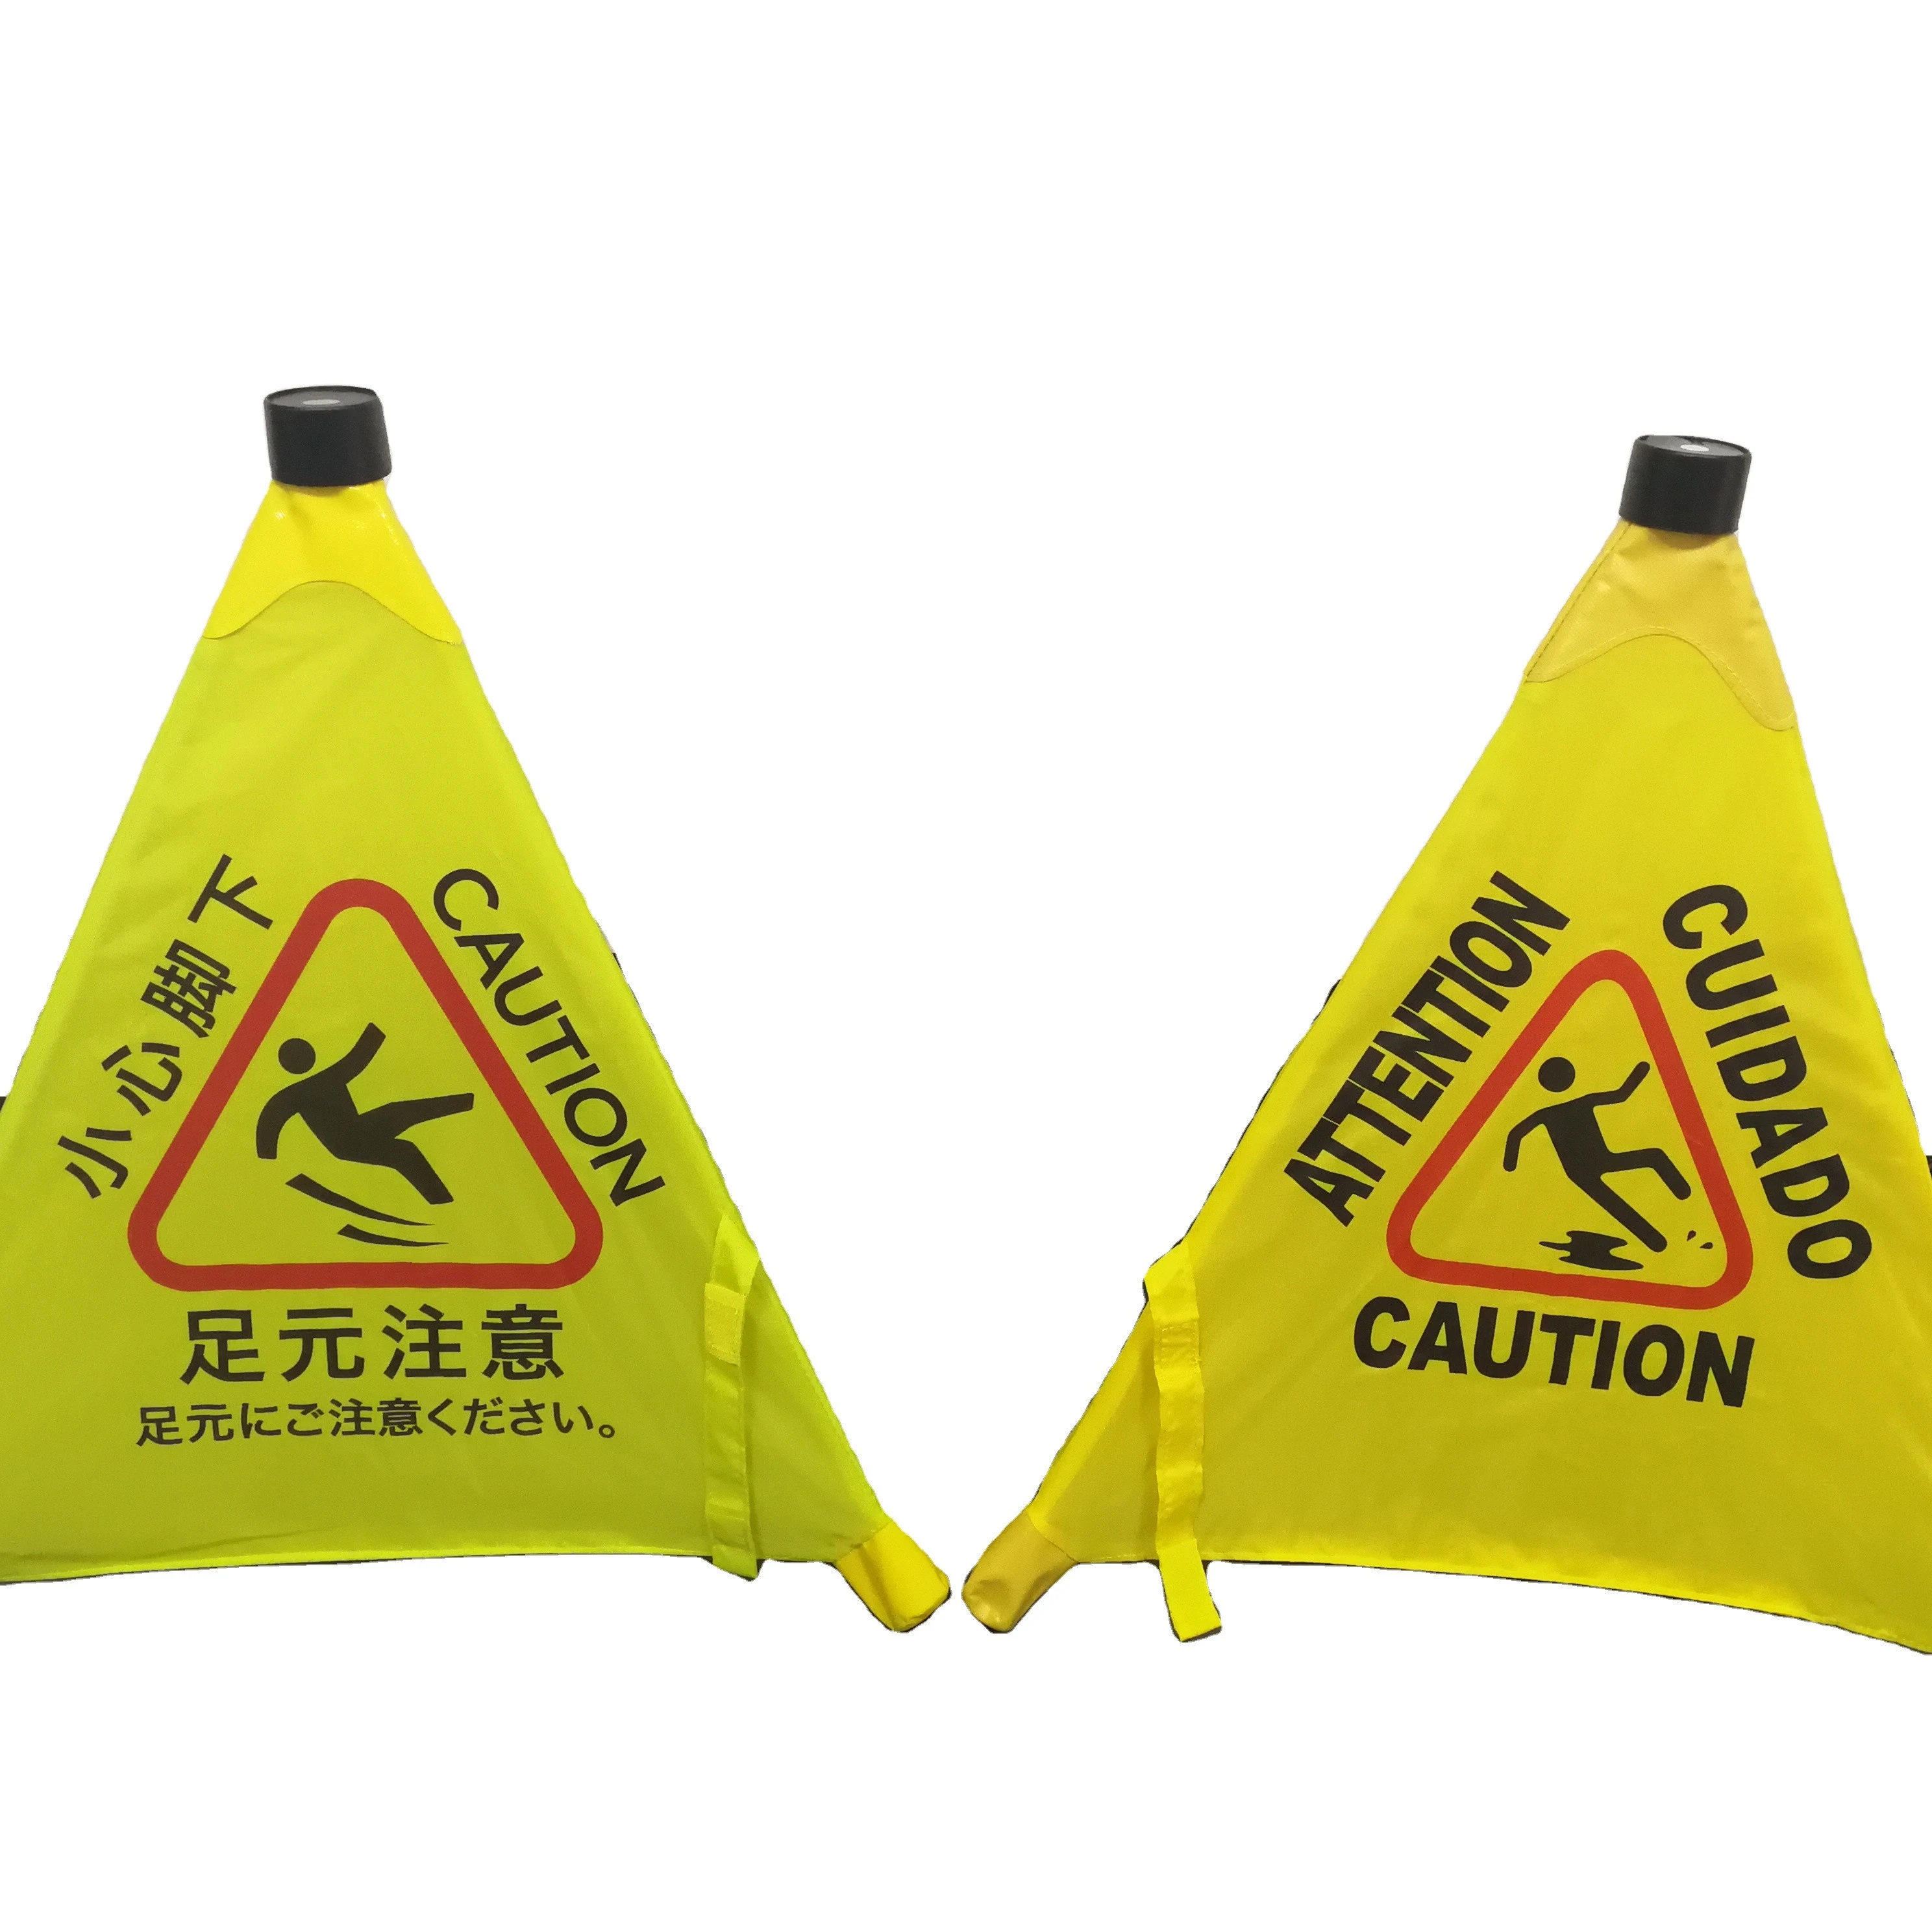 Yellow Plastic Caution Folding Pop-Up Safety Warning Sign Cone for hotel supermarket